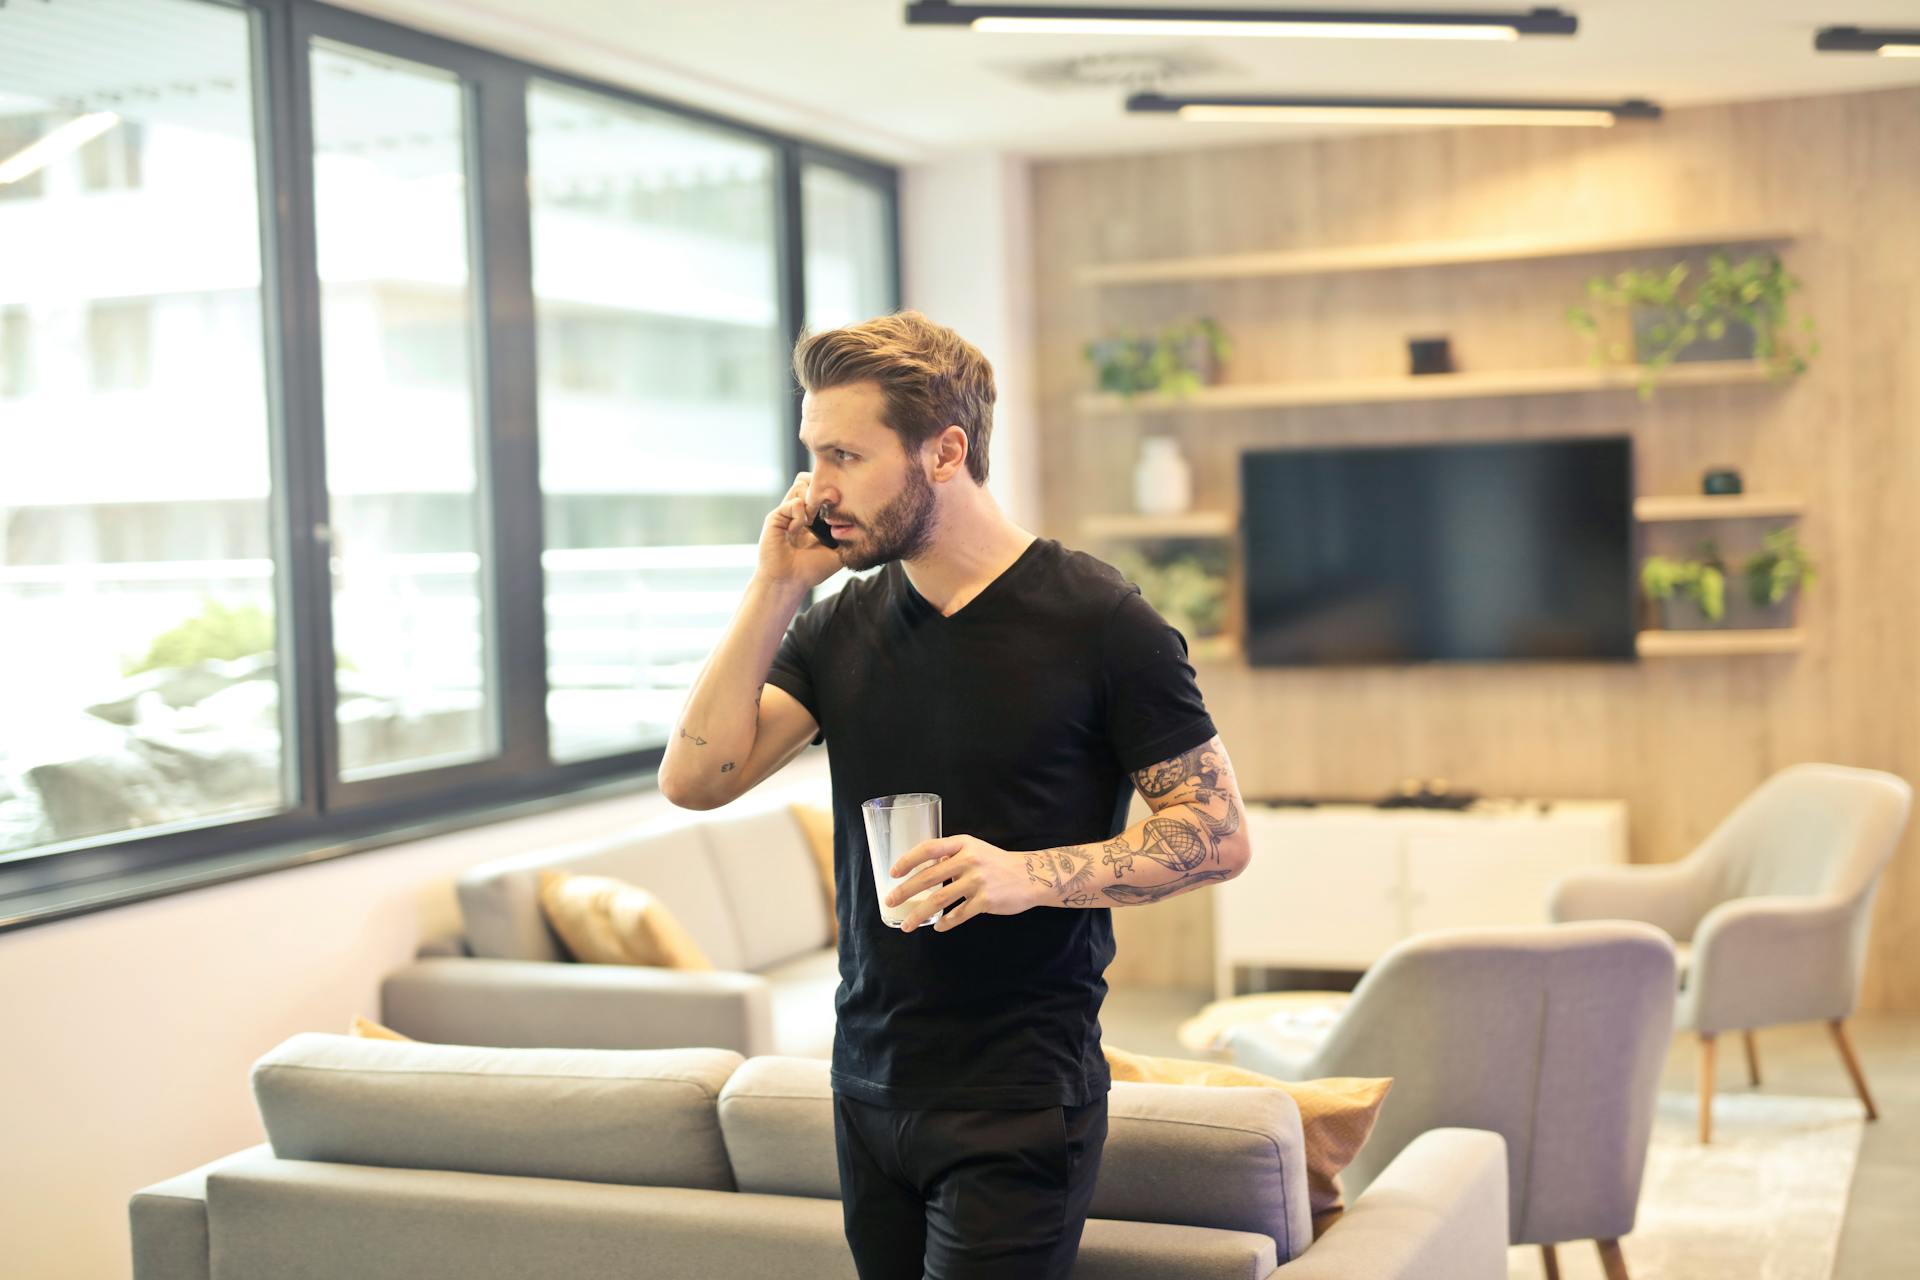 A man on the phone | Source: Pexels